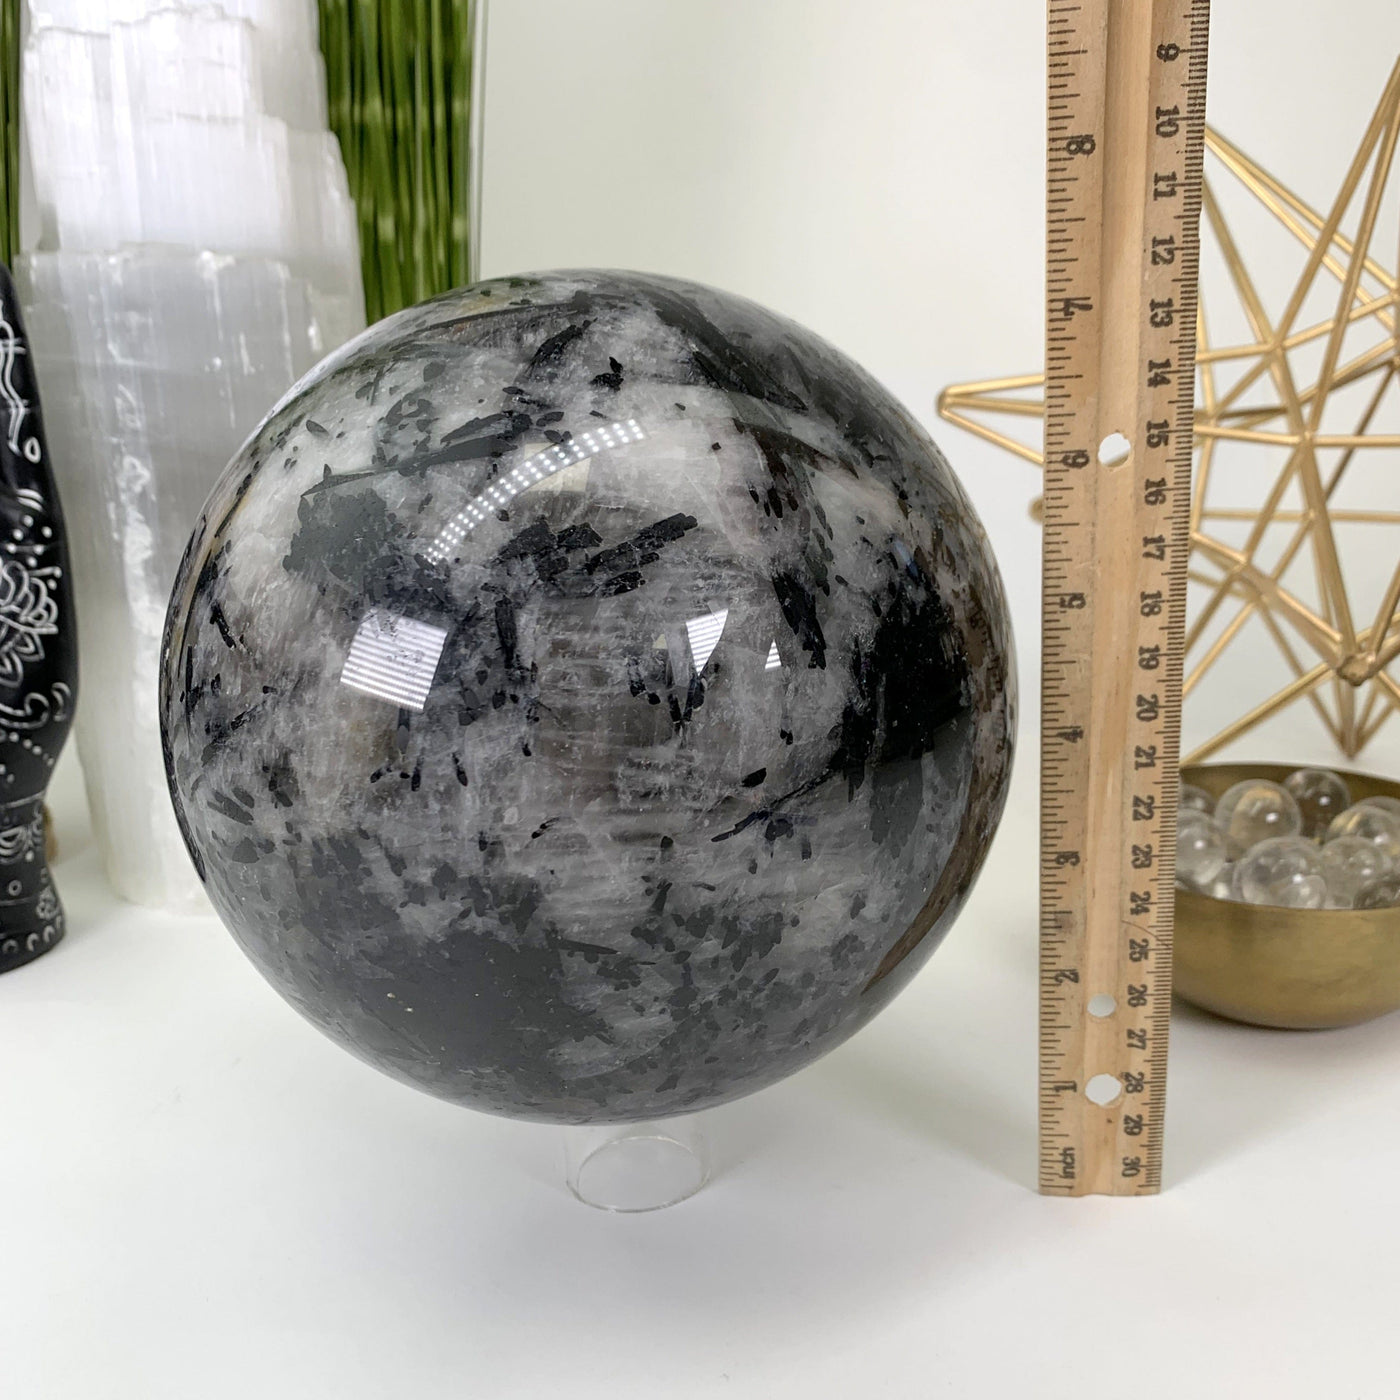 Picture of sphere next to ruler for size reference.